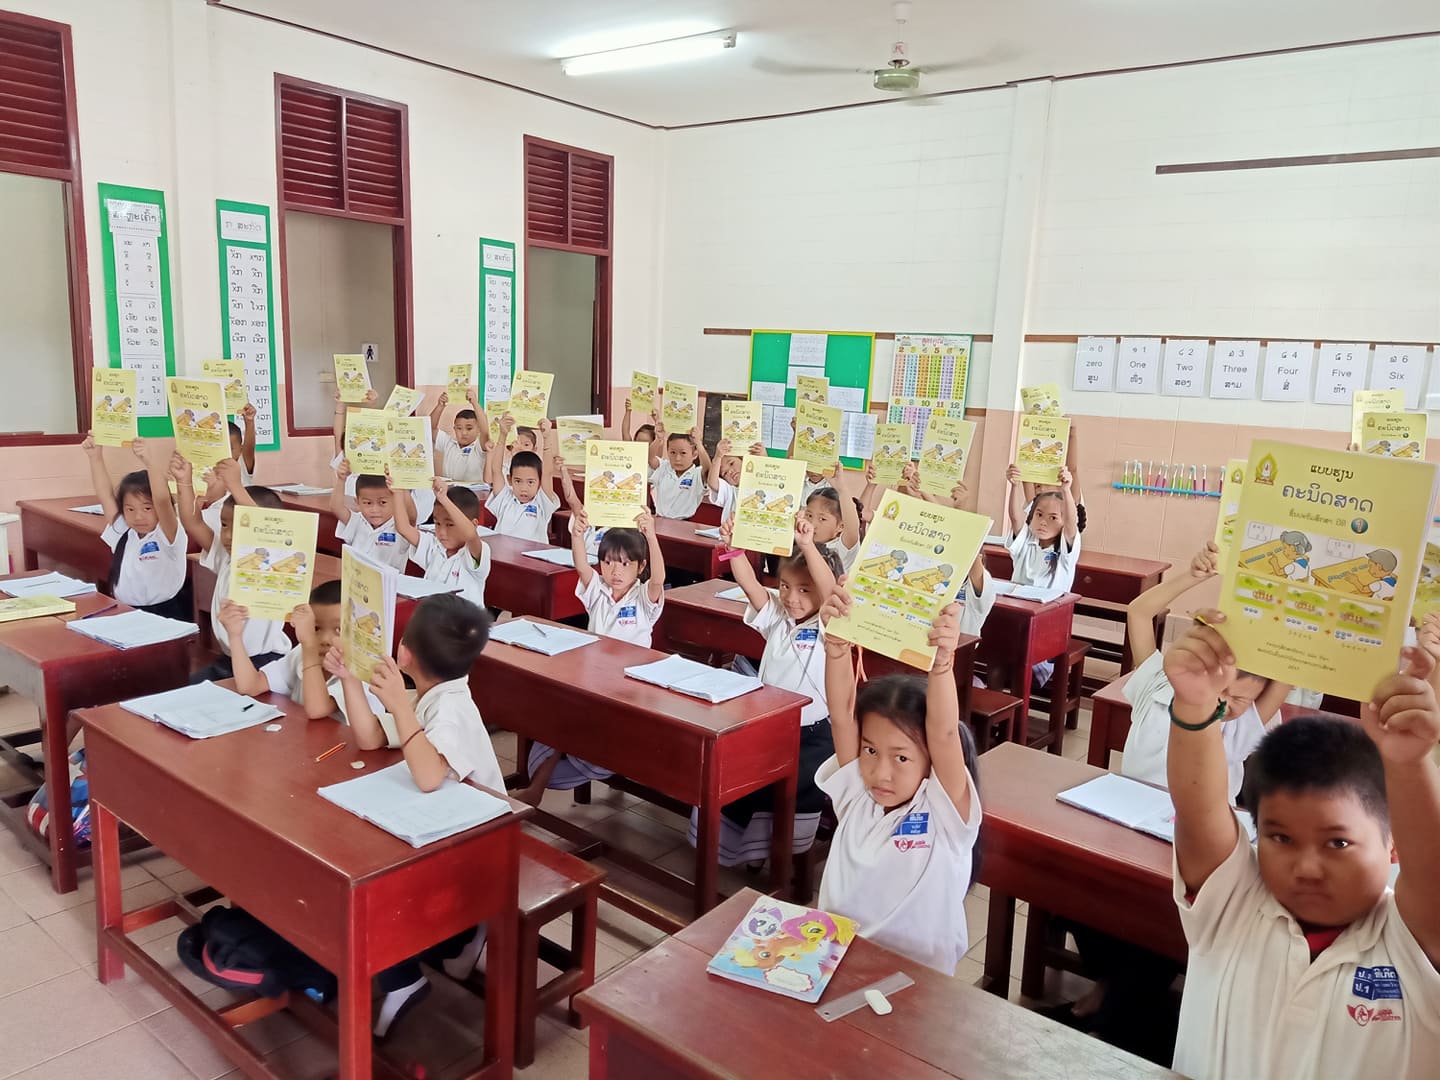 Students in their classroom